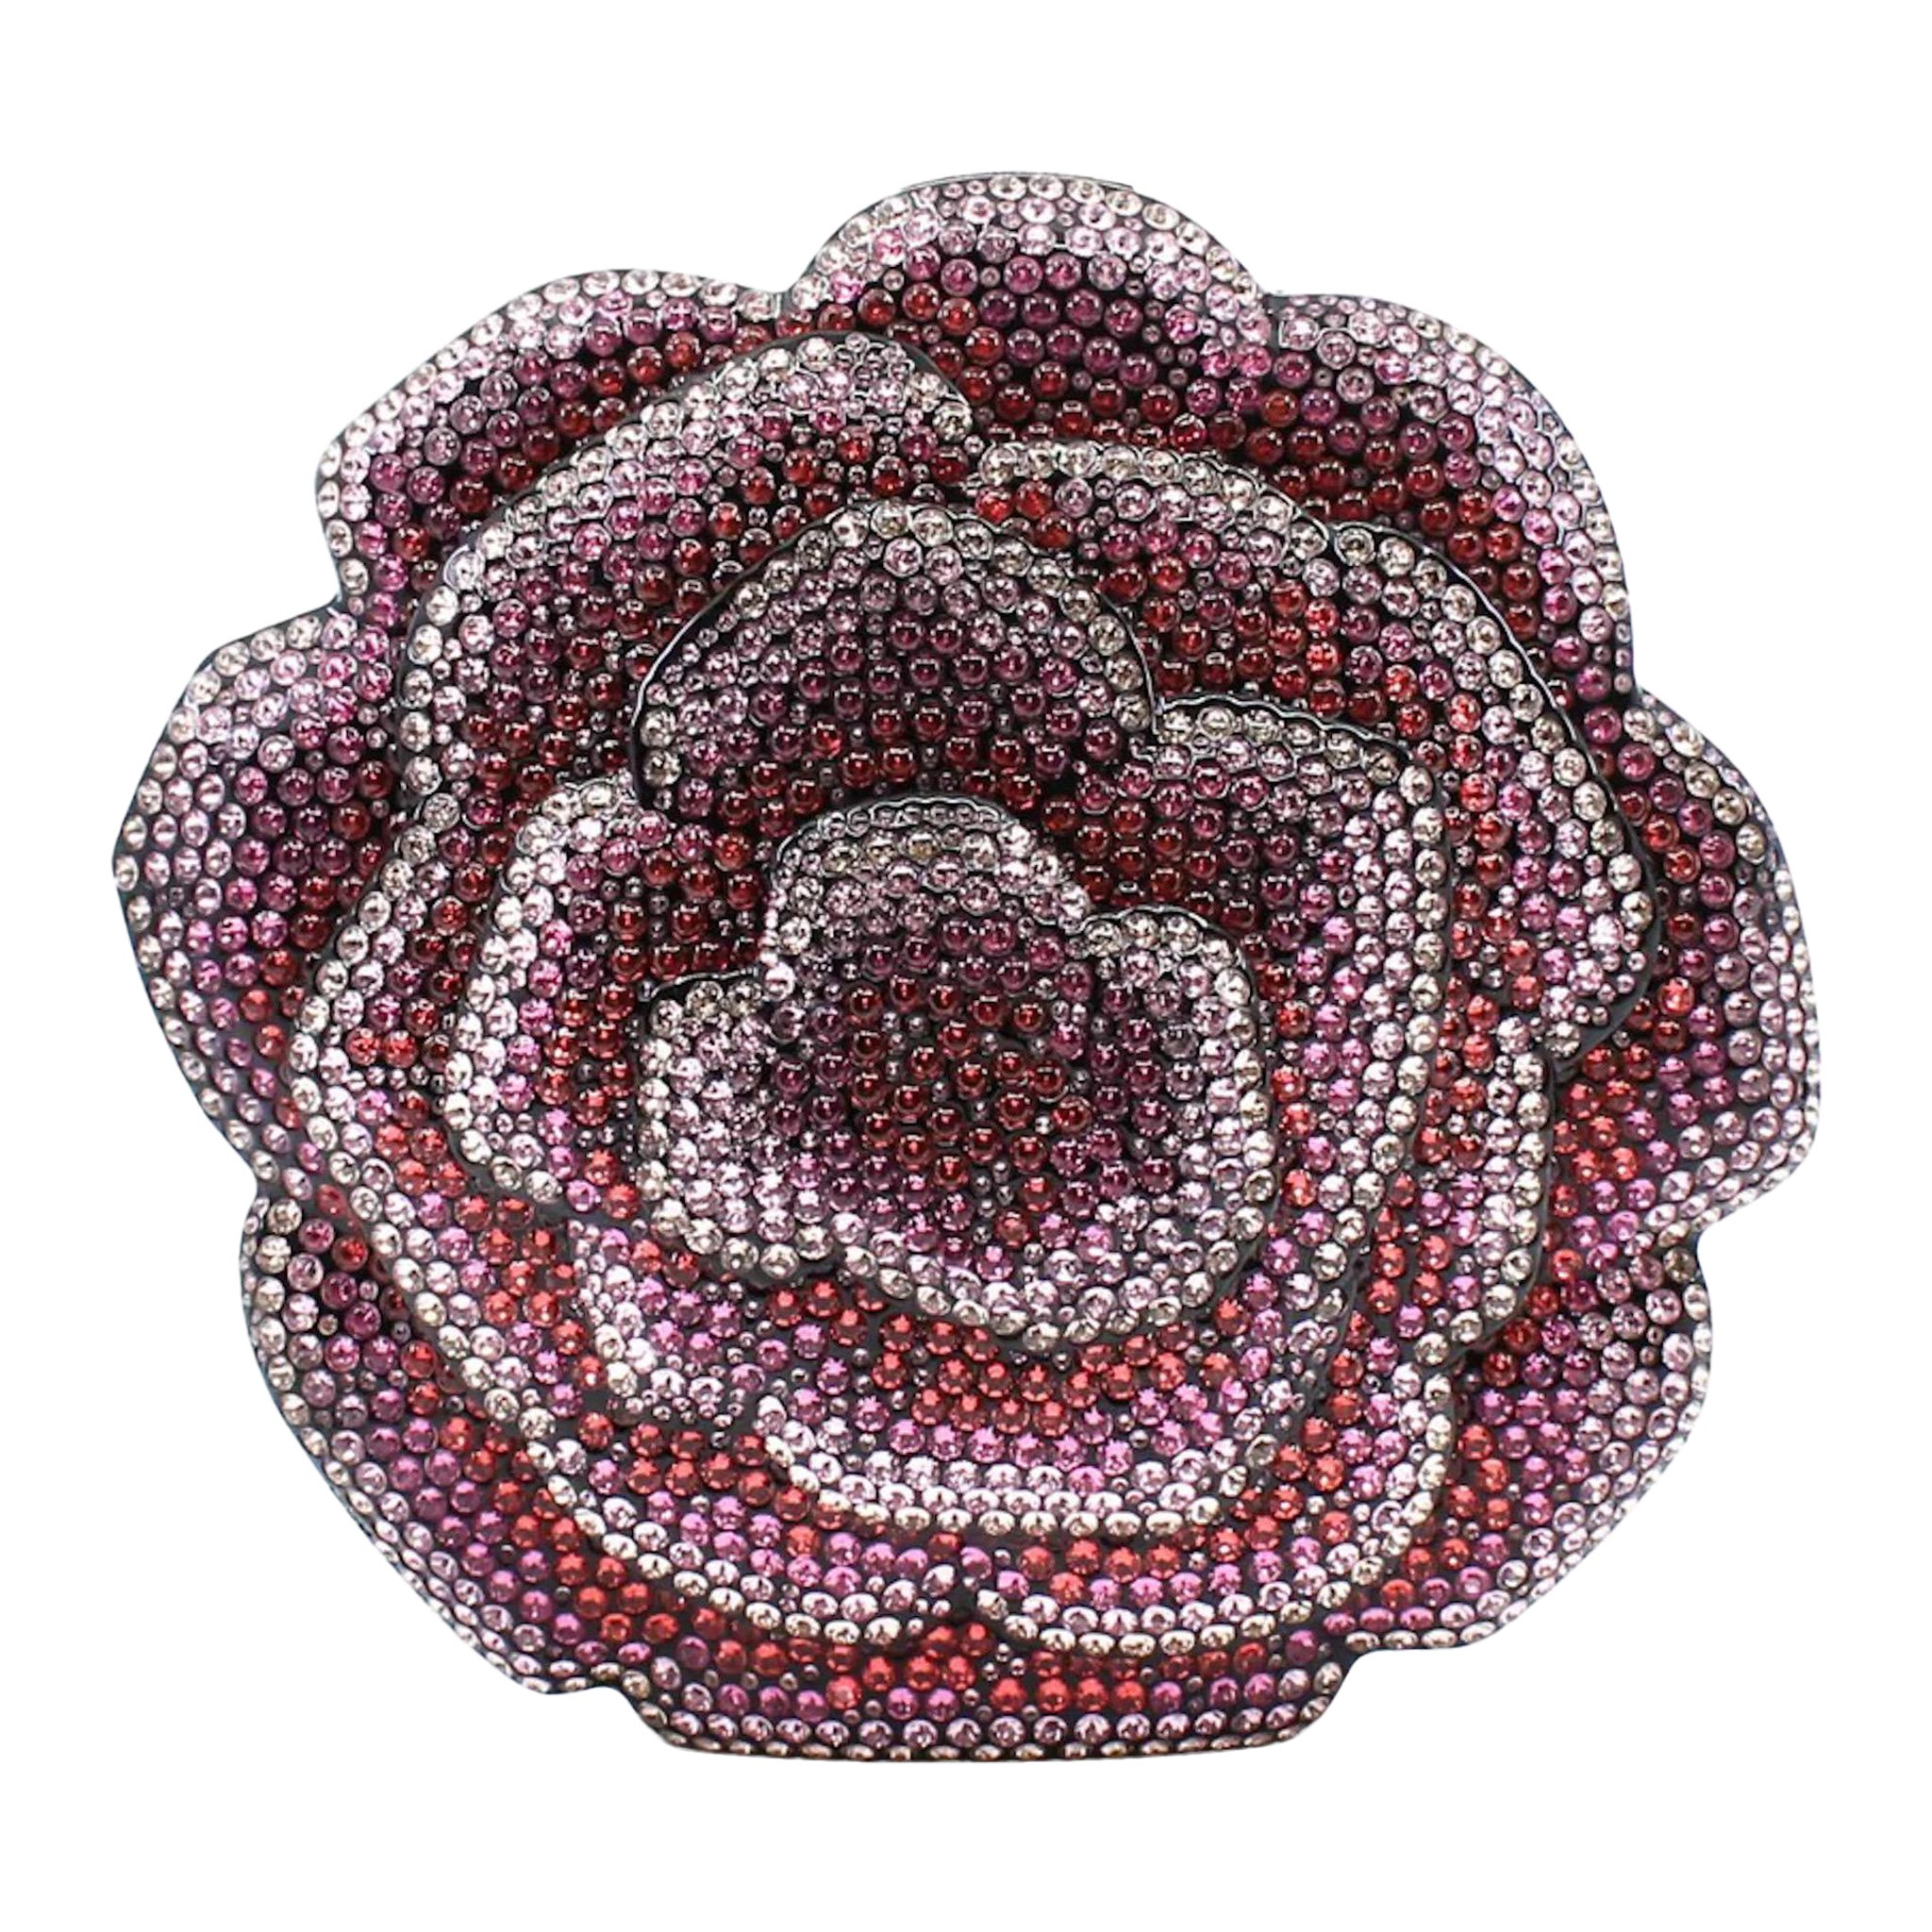 Chanel Minaudière Limited Edition Camellia with pink tone crystals